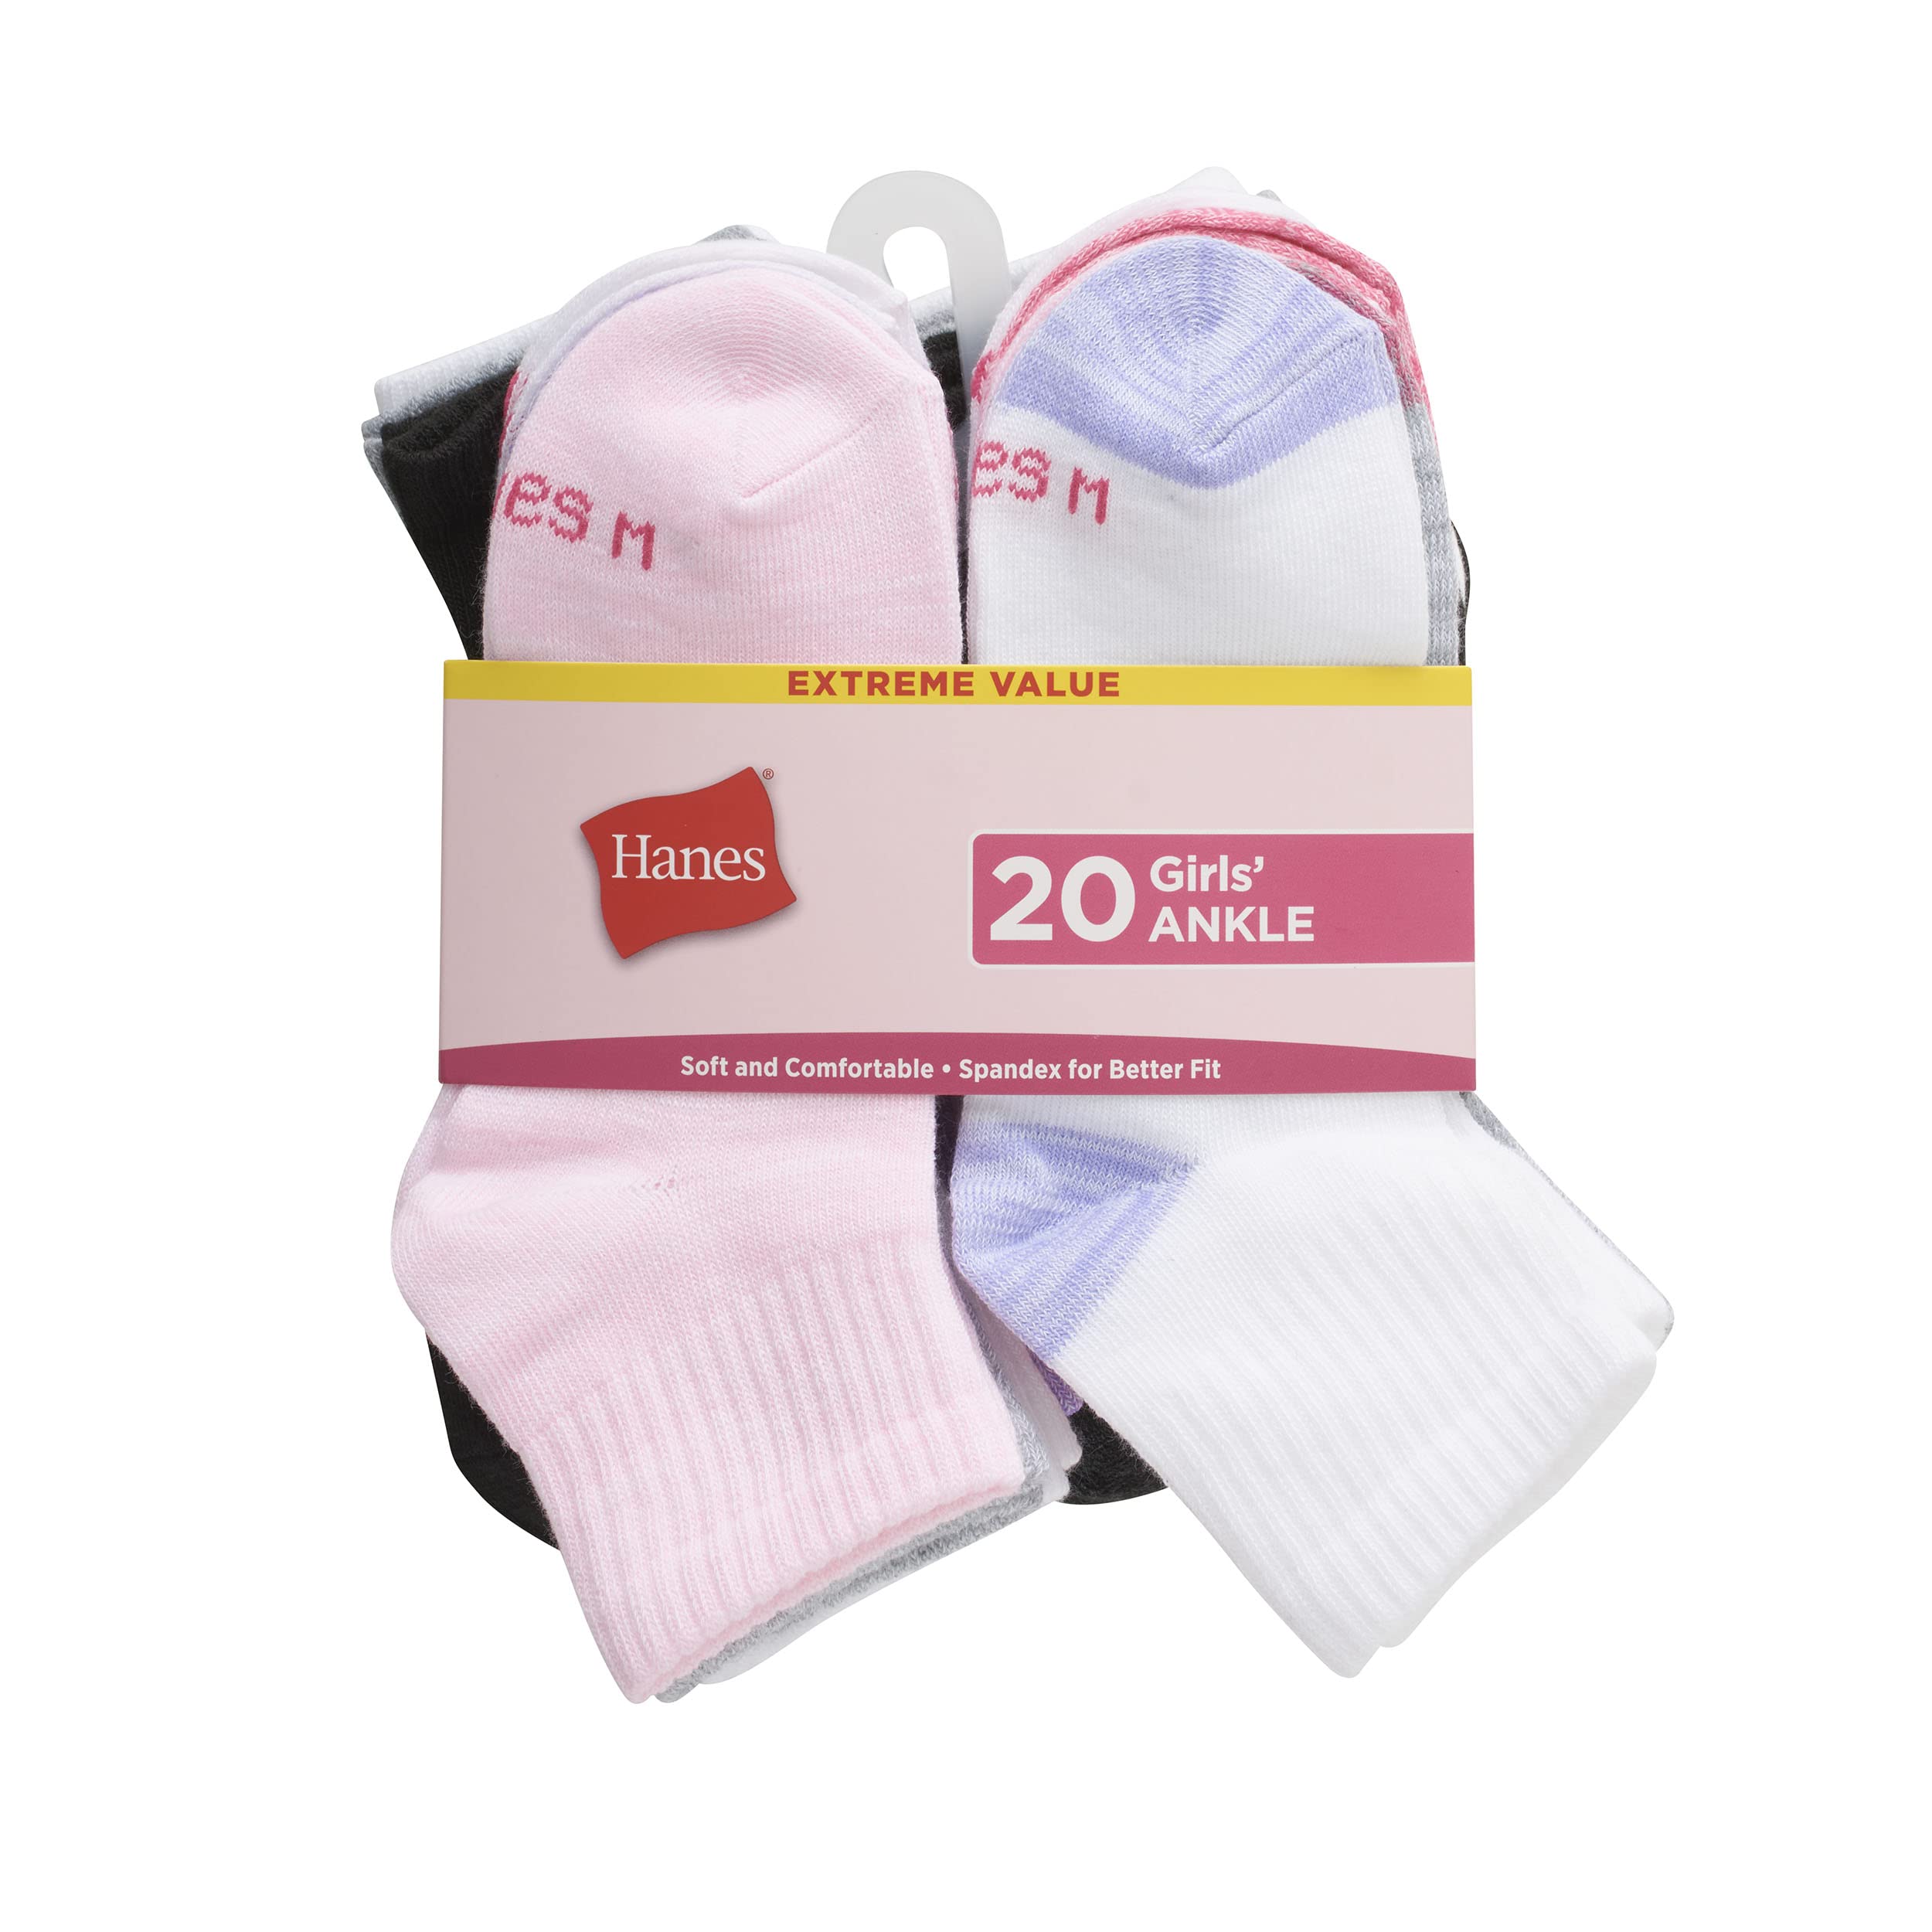 Hanes Boys, Super Value 20-Pair Socks, Ankle and No Show Multi-Packs